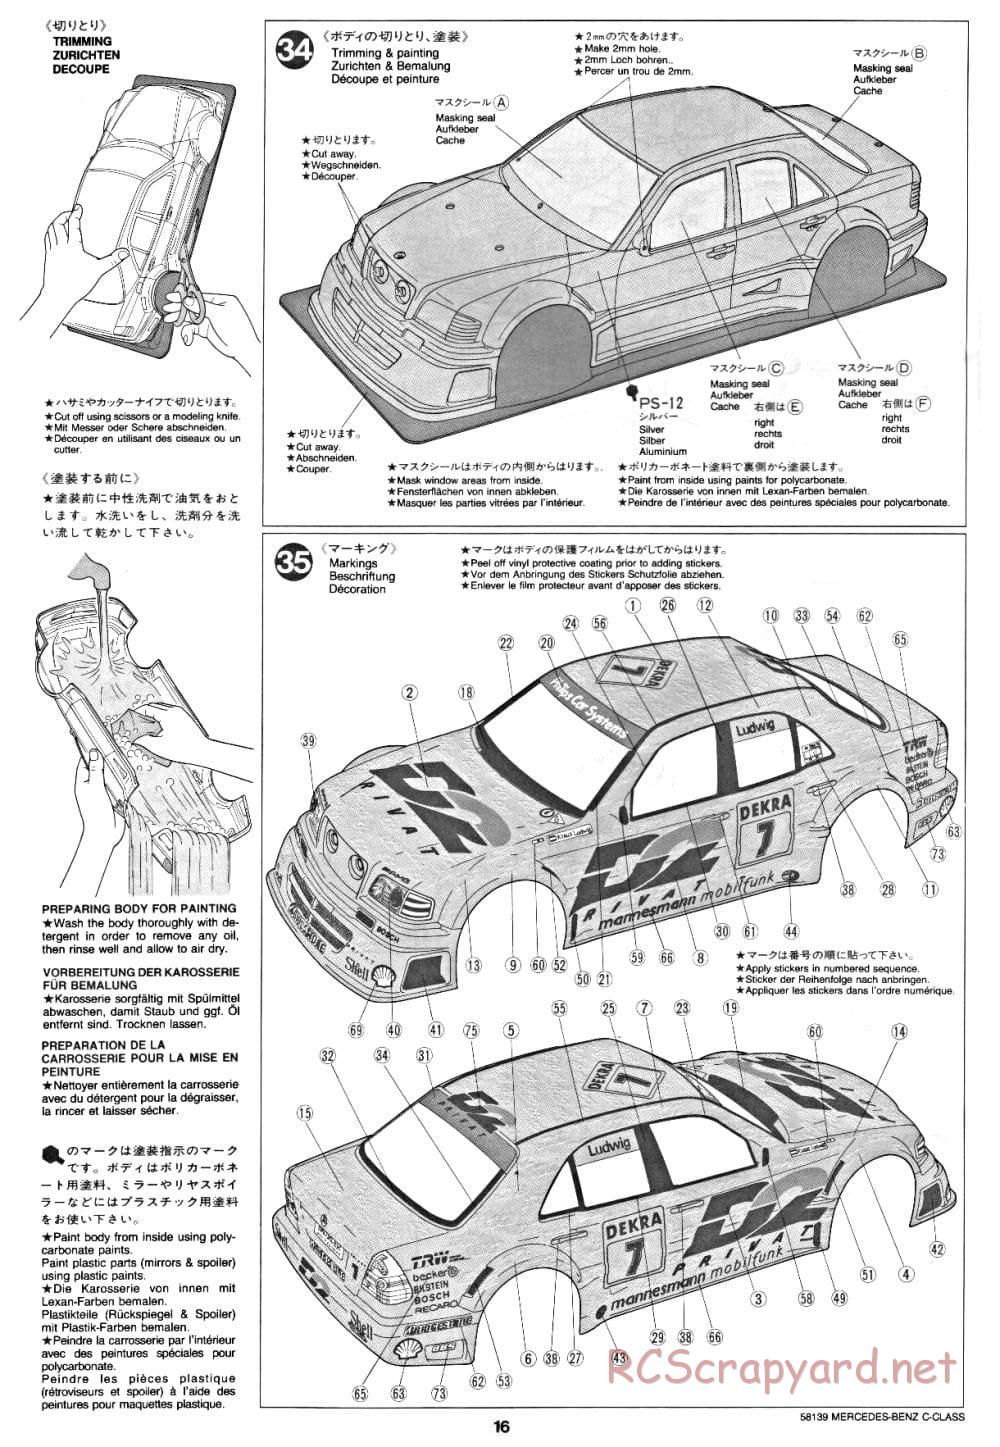 Tamiya - AMG Mercedes-Benz C-Class DTM D2 - TA-02 Chassis - Manual - Page 16